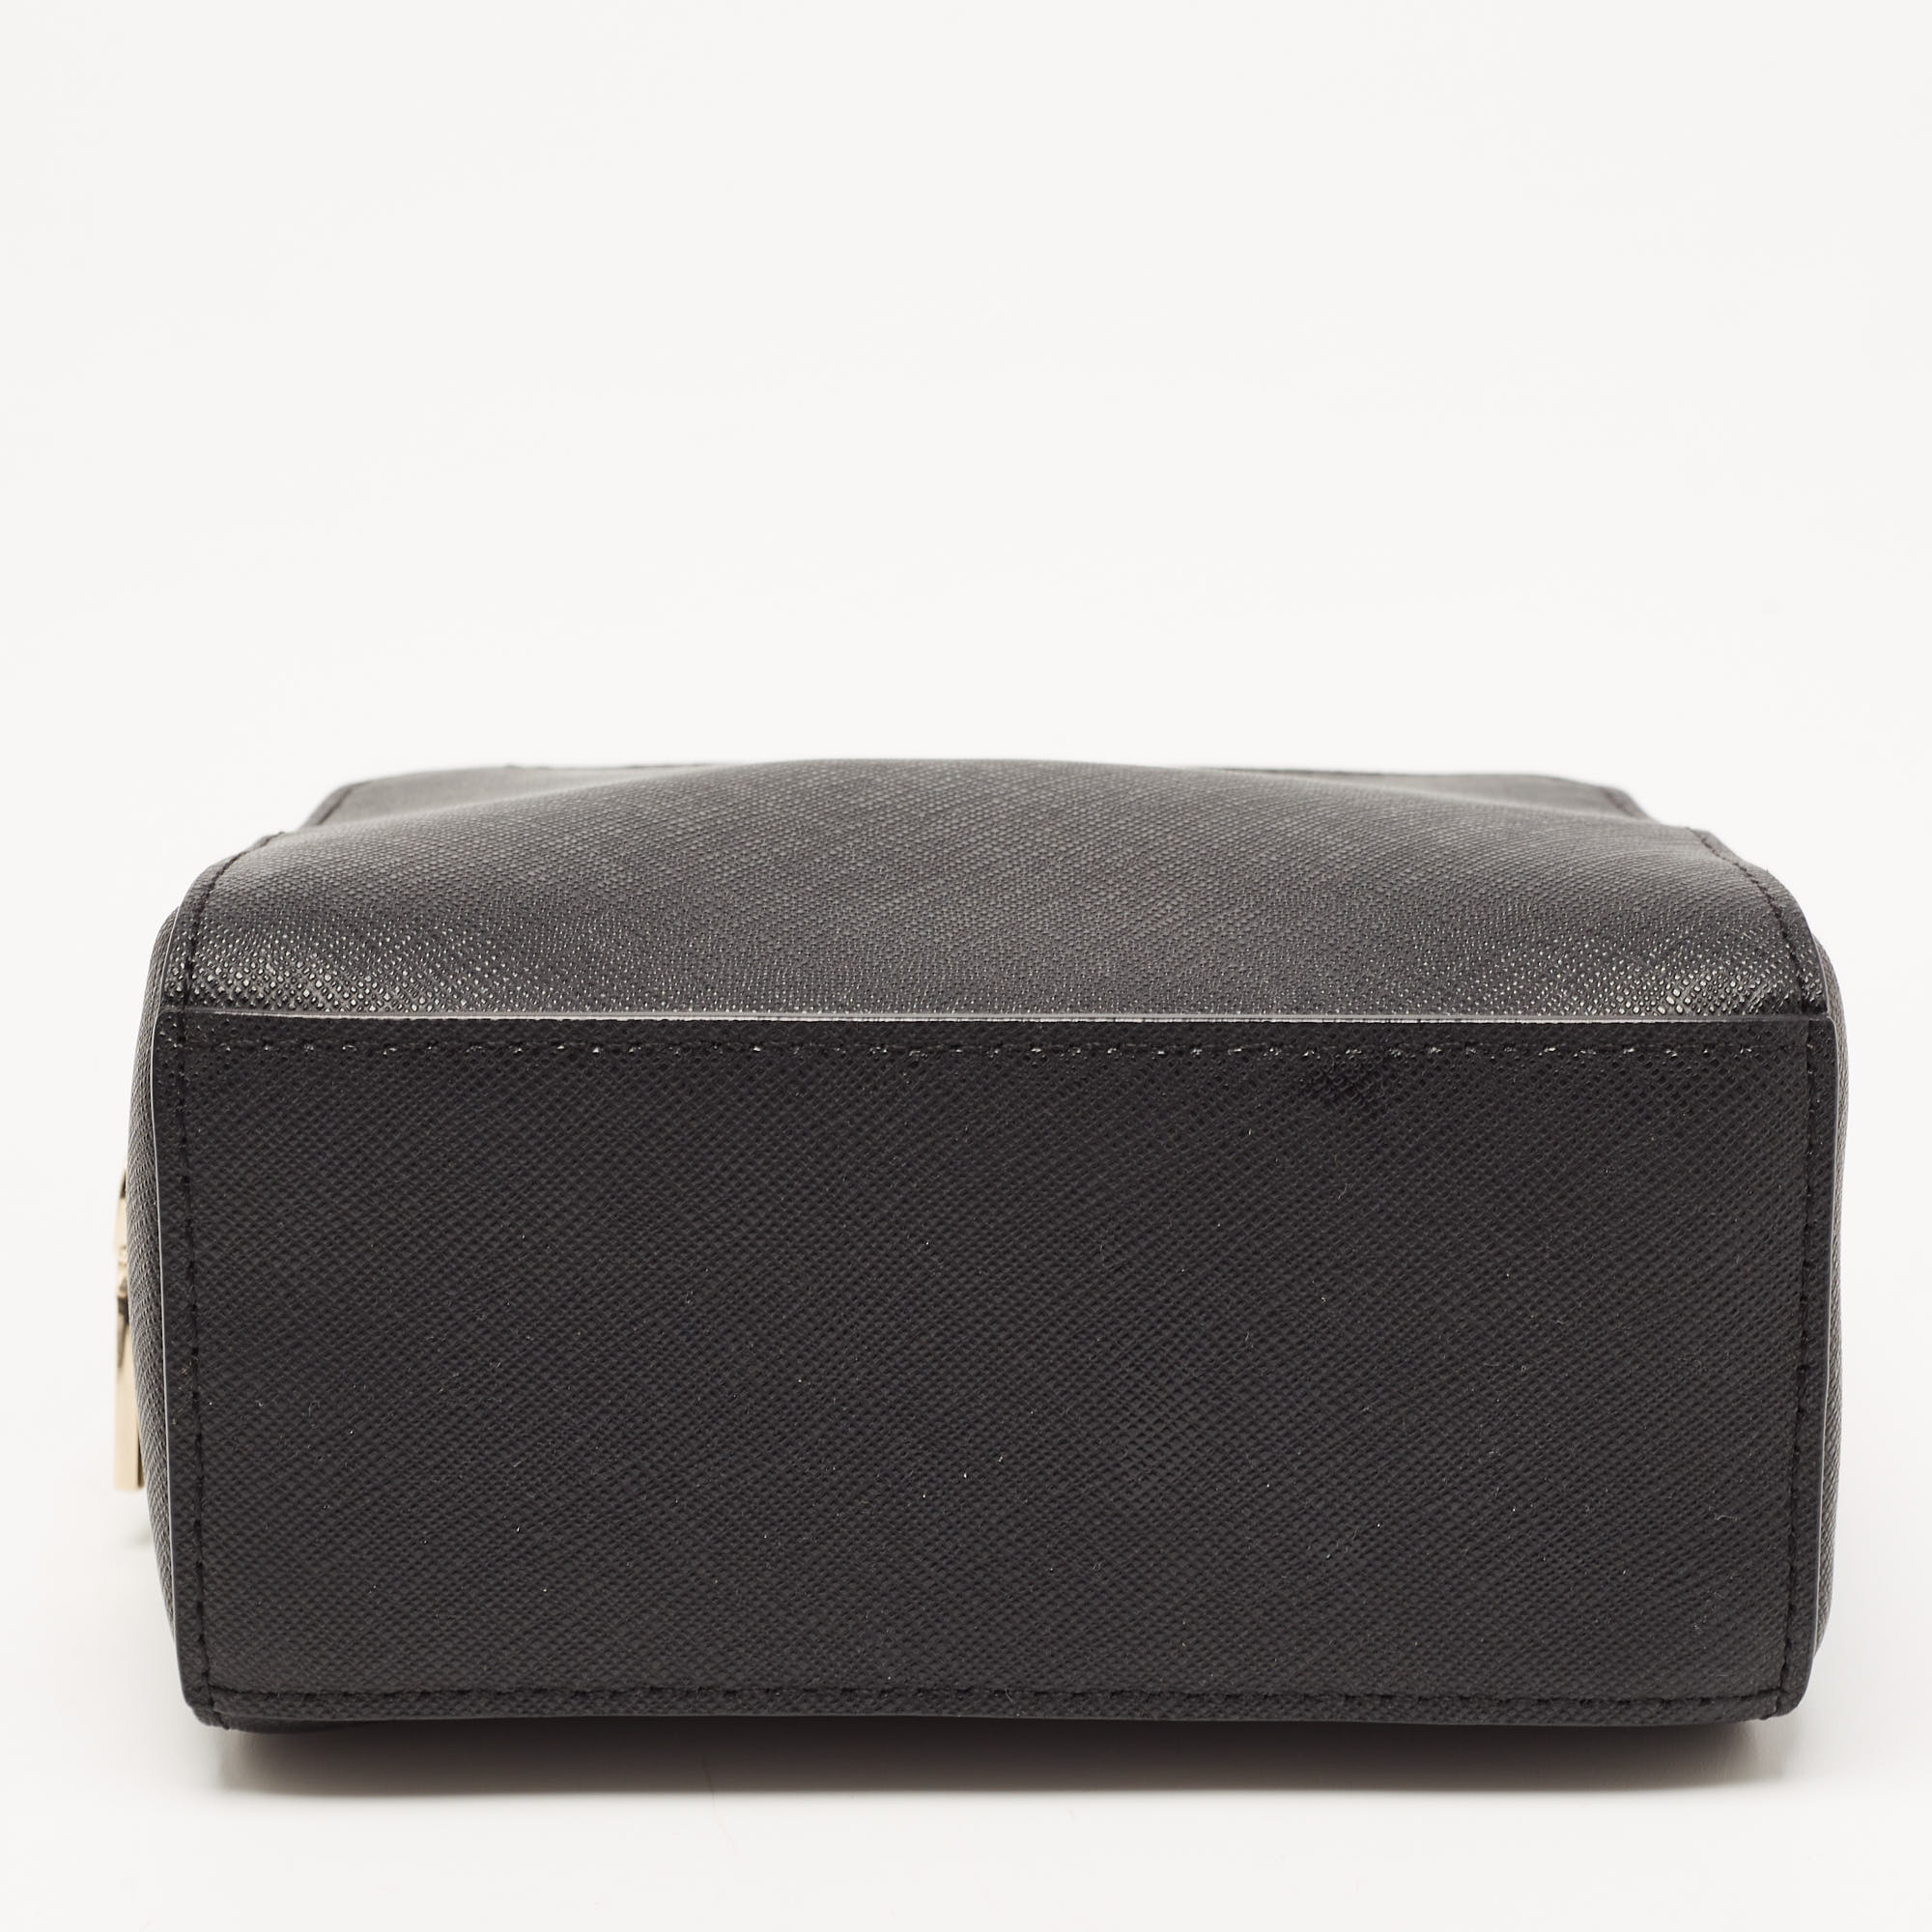 DKNY Black Saffiano Leather Cosmetic Pouch